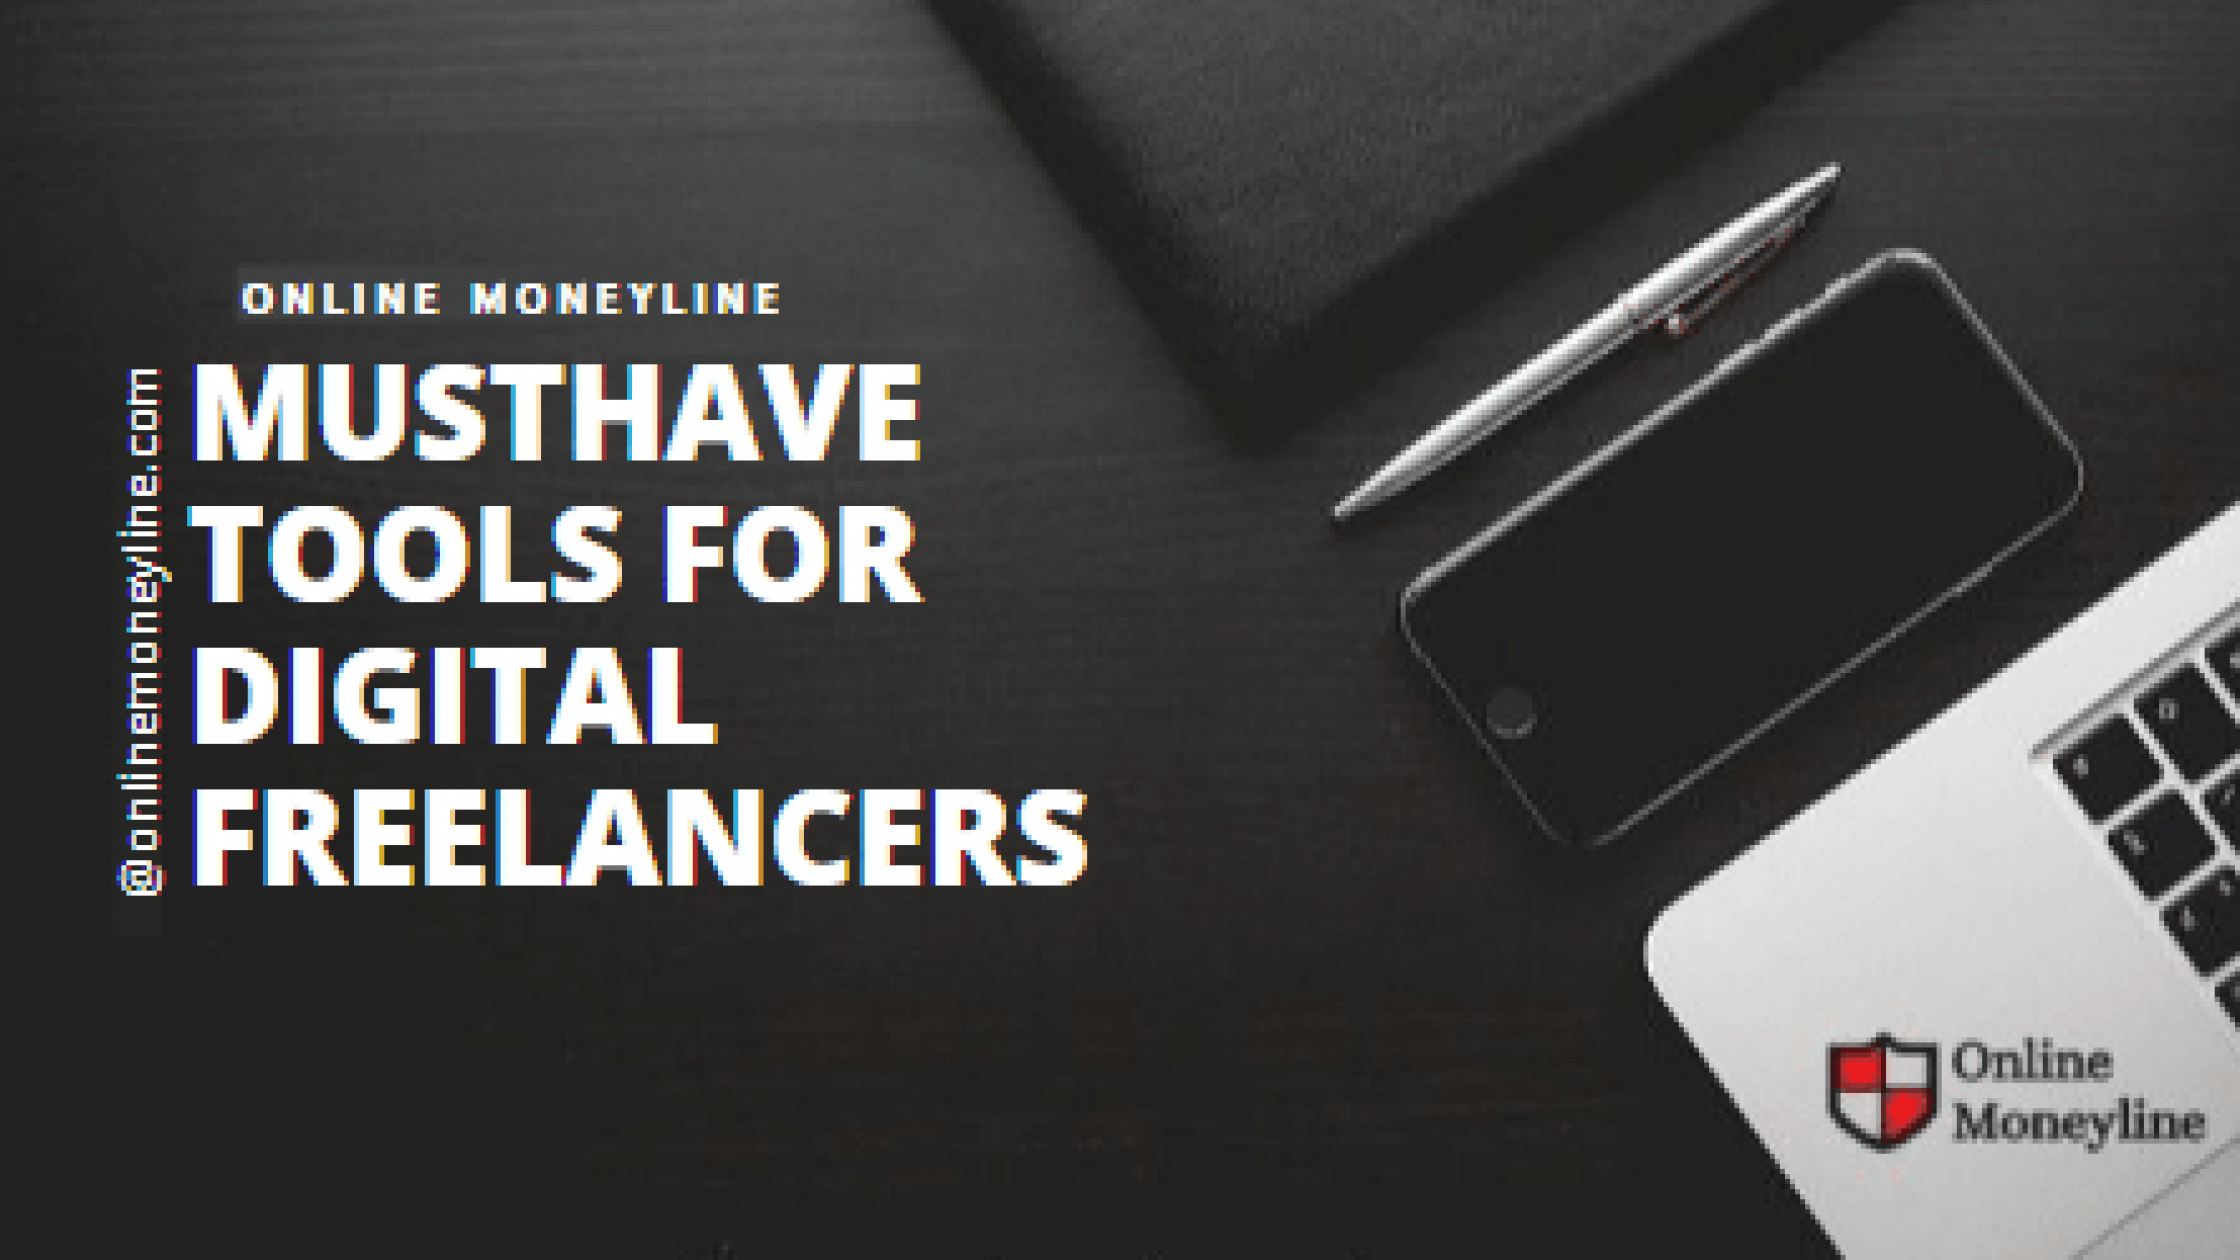 MustHave Tools For Digital Freelancers